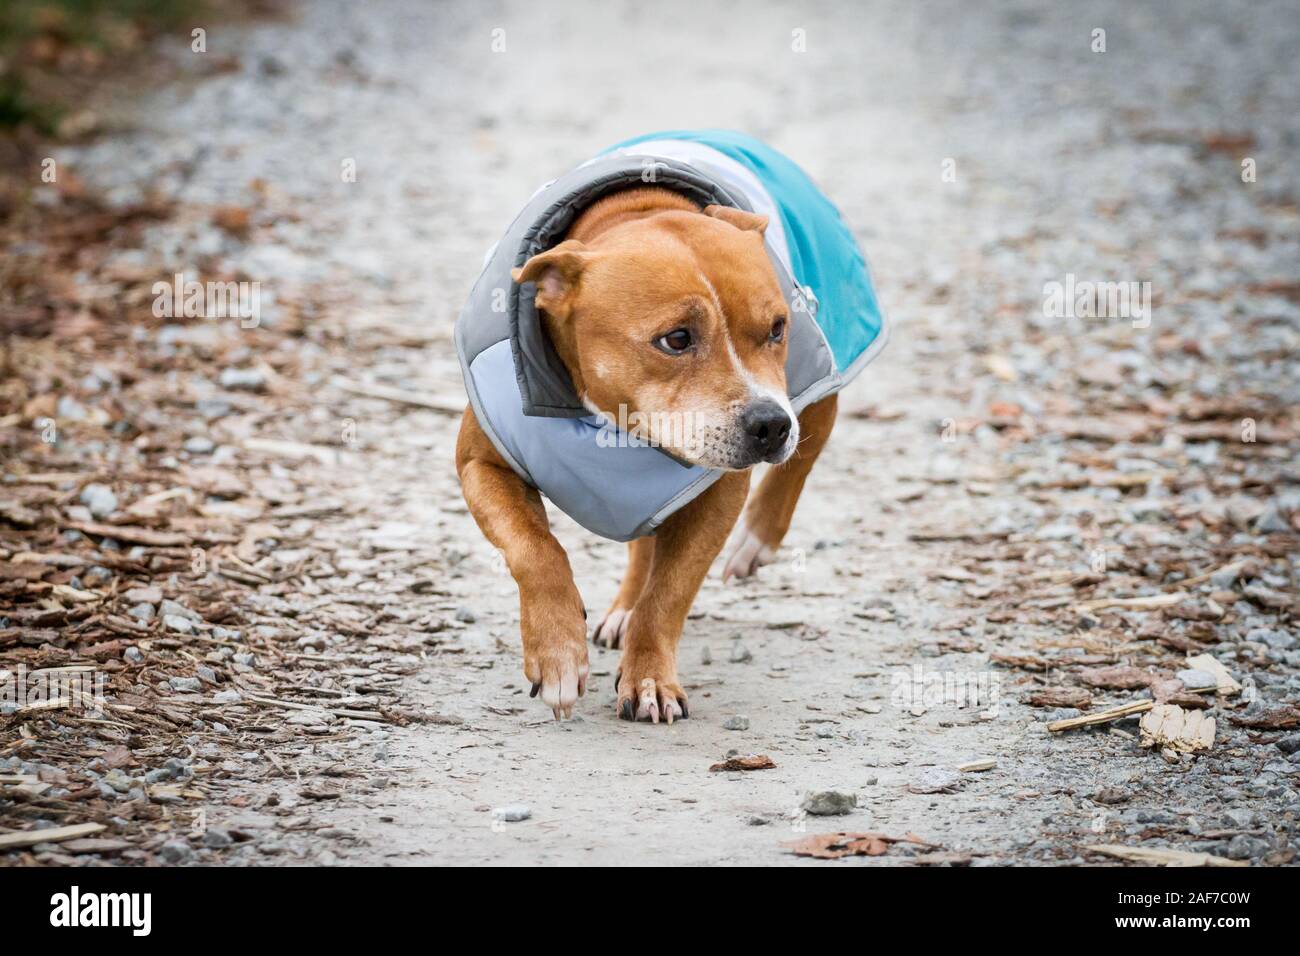 Staffordshire Bull Terrier wearing a coat Stock Photo